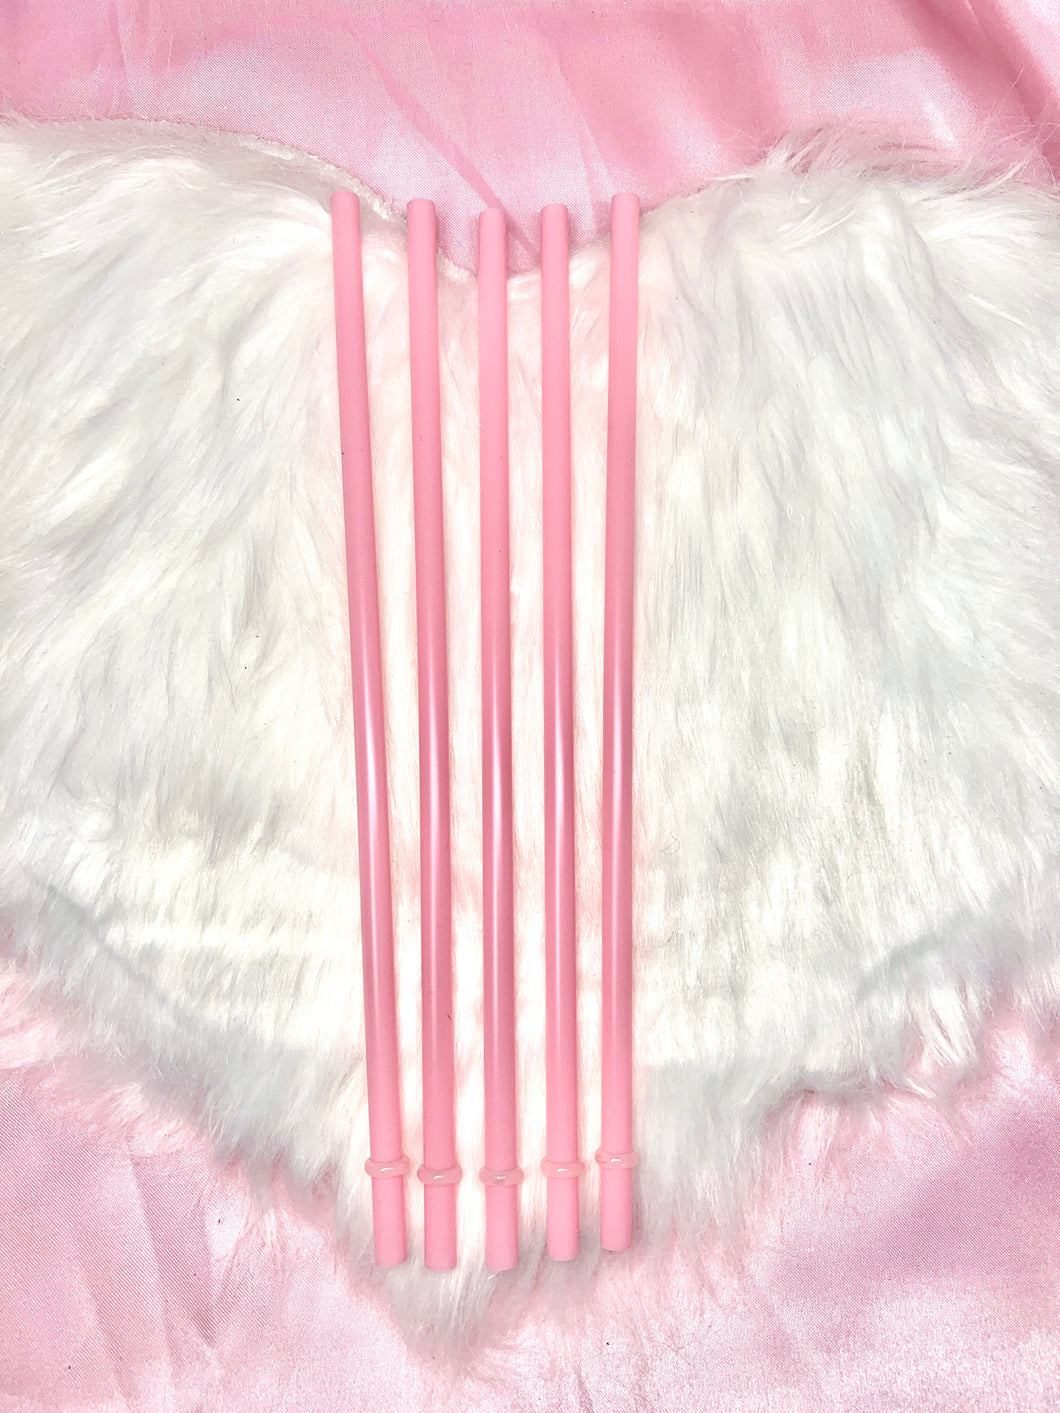 PINK 10.5 inch reusable plastic straw